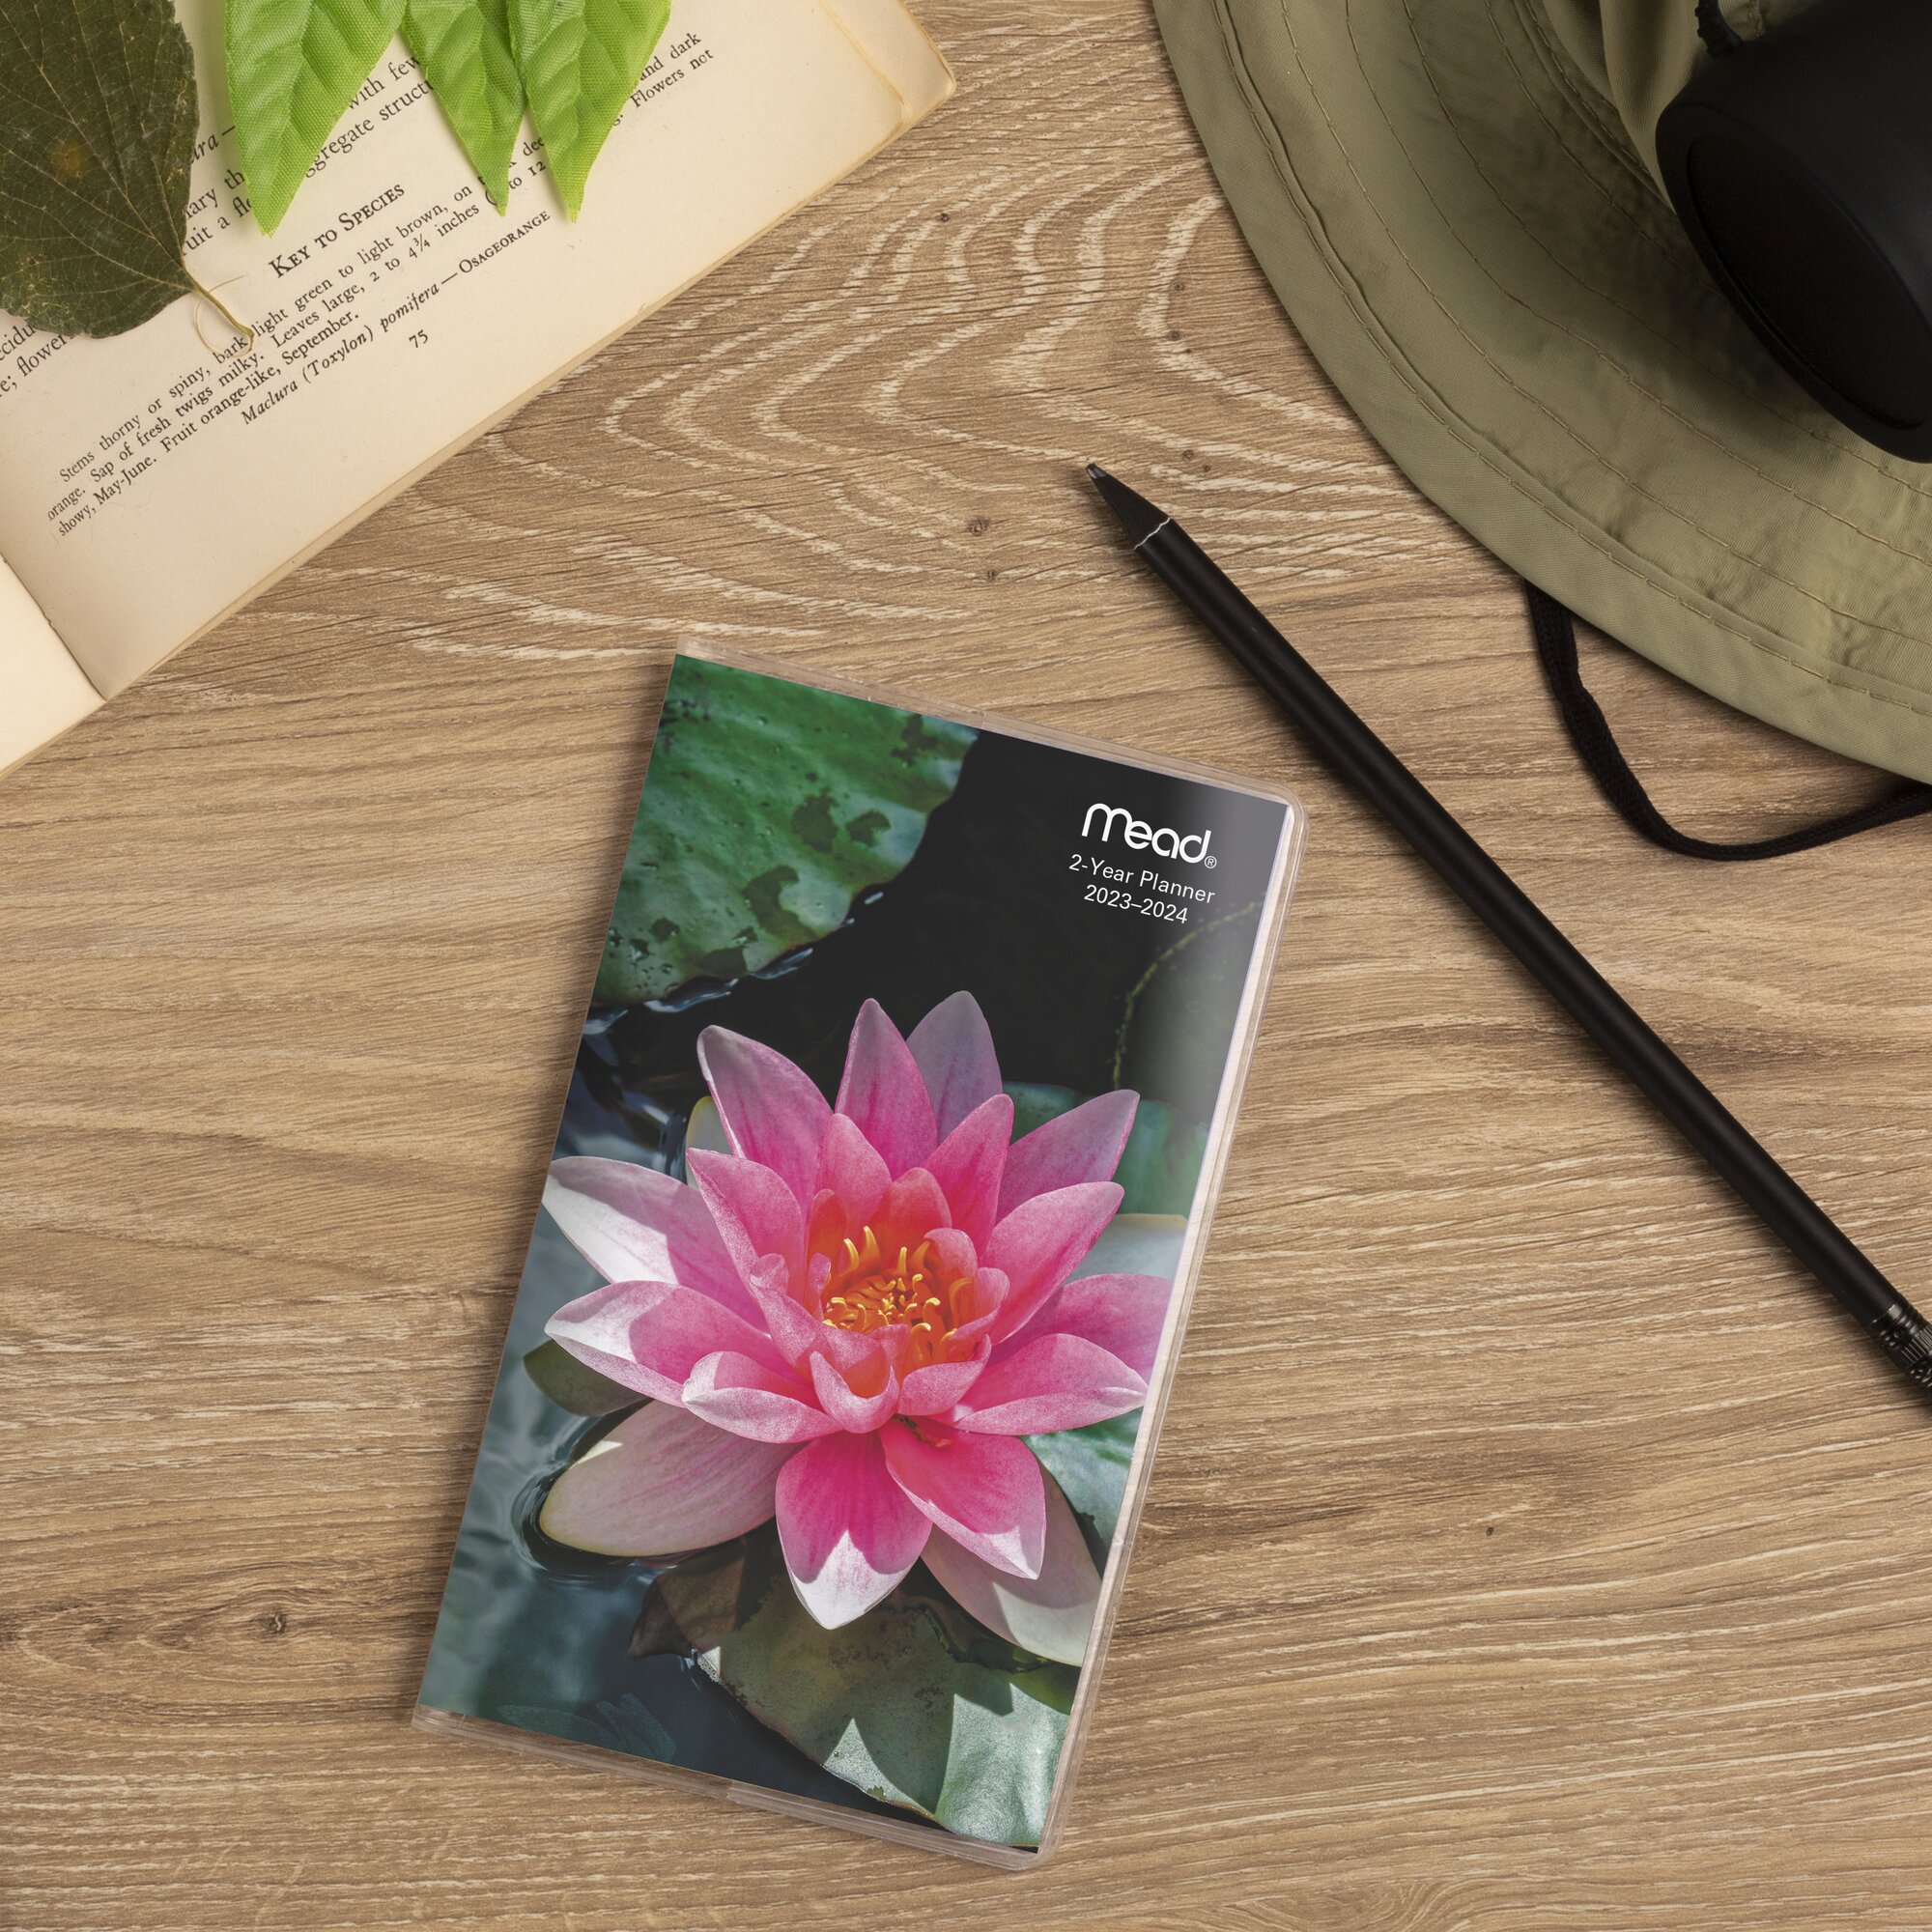 FLORAL 2023-2024 TWO Year Monthly Pocket Planner - Pocket Planners $7.